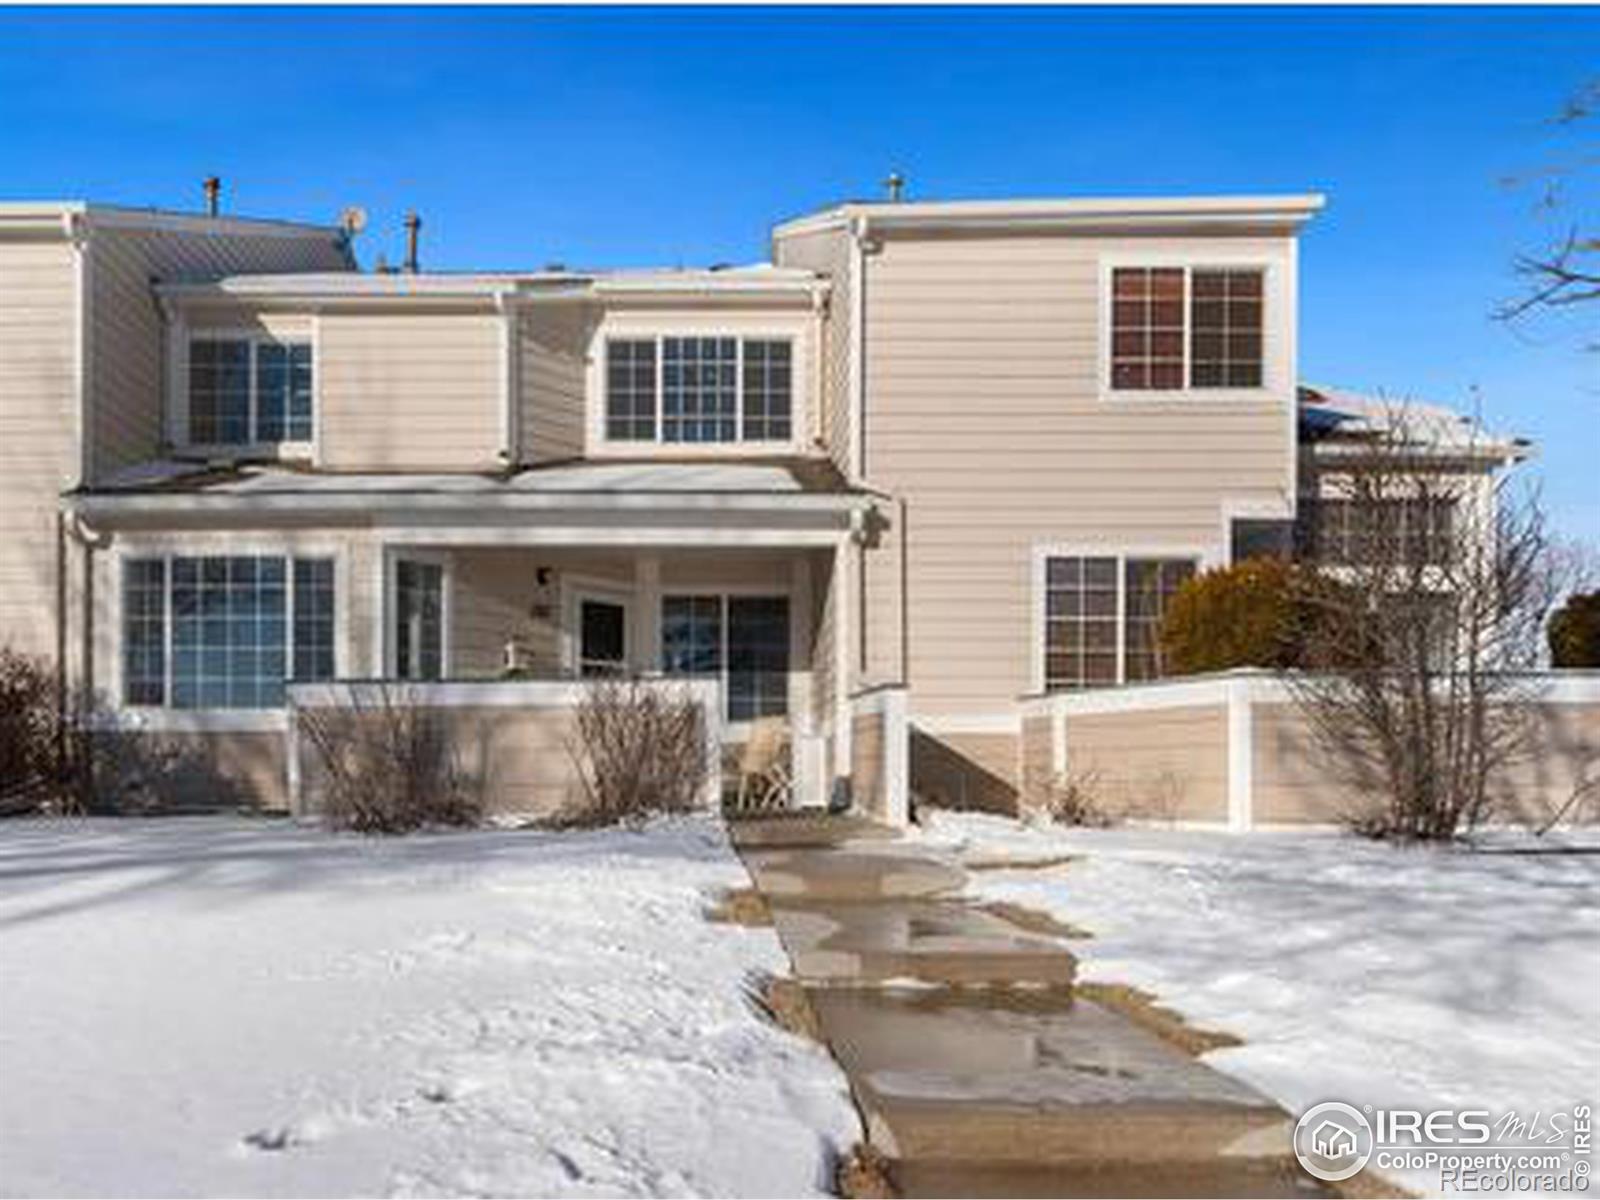 2502  Timberwood Drive, fort collins MLS: 4567891001809 Beds: 3 Baths: 4 Price: $415,000